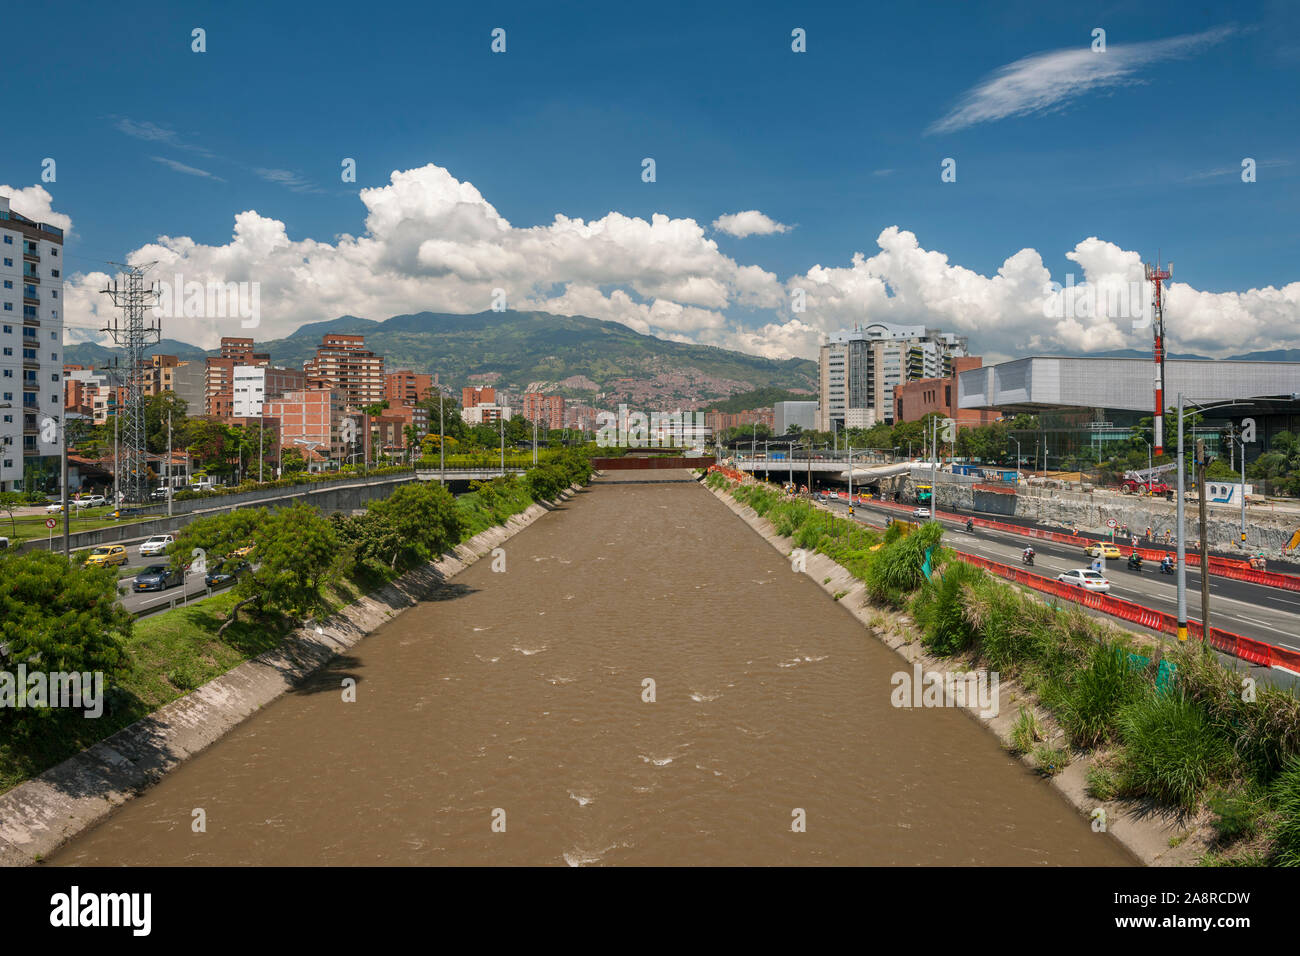 The Medellin River where it flows through the centre of the city of Medellin, Colombia. Comunas 10 and 11 are on either side of the river. Stock Photo